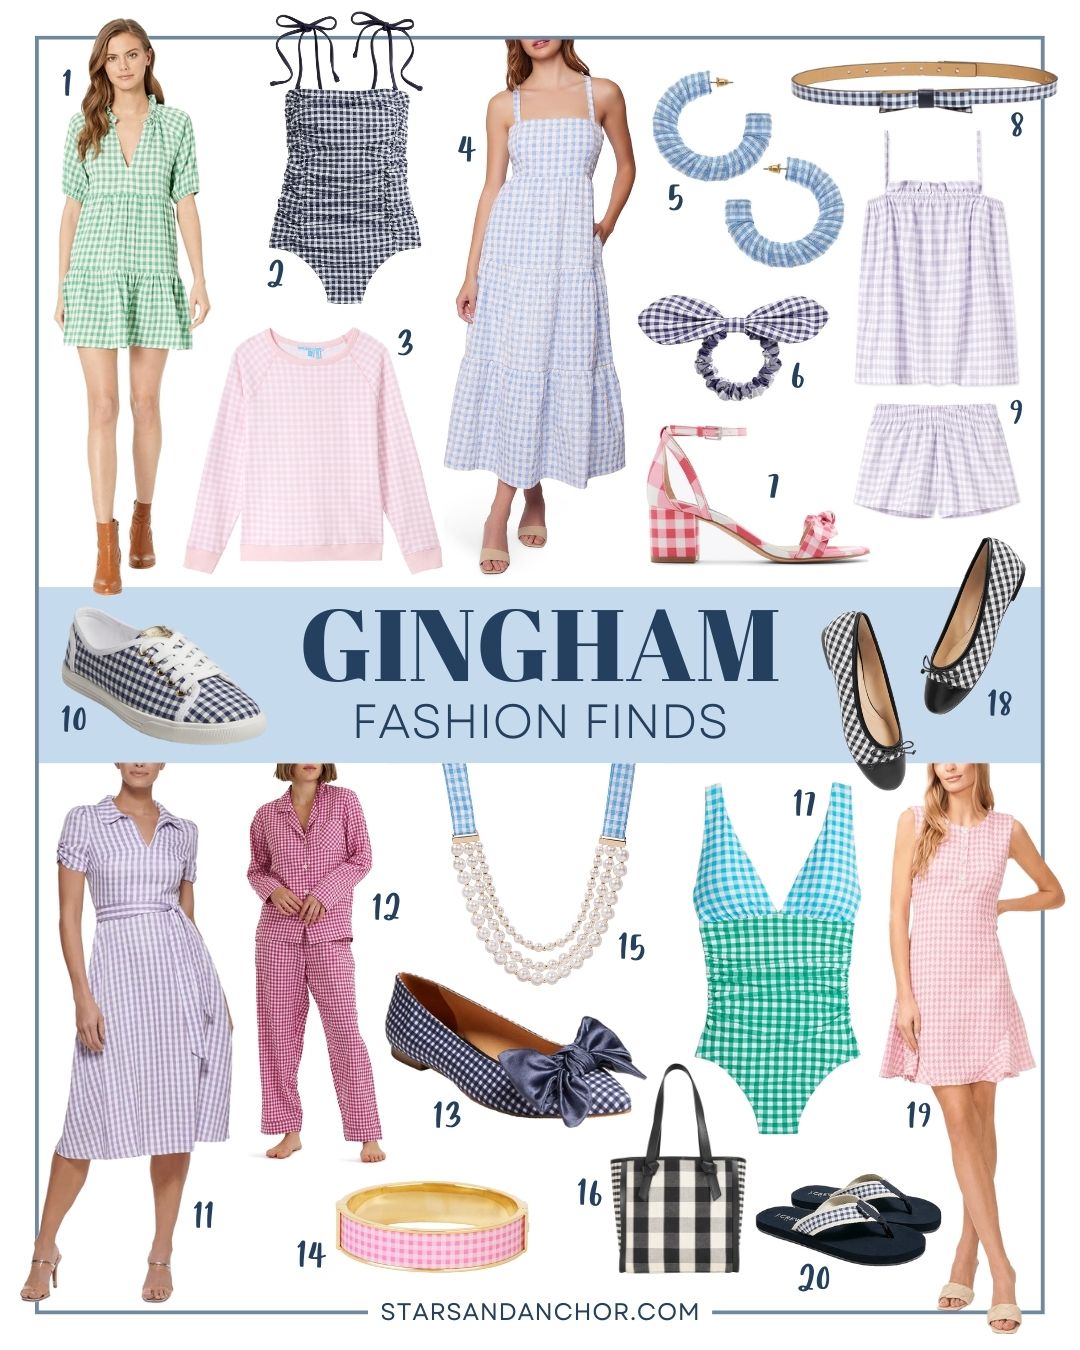 A collage of gingham dresses, tops, jewelry, shoes, pajamas, and accessories.